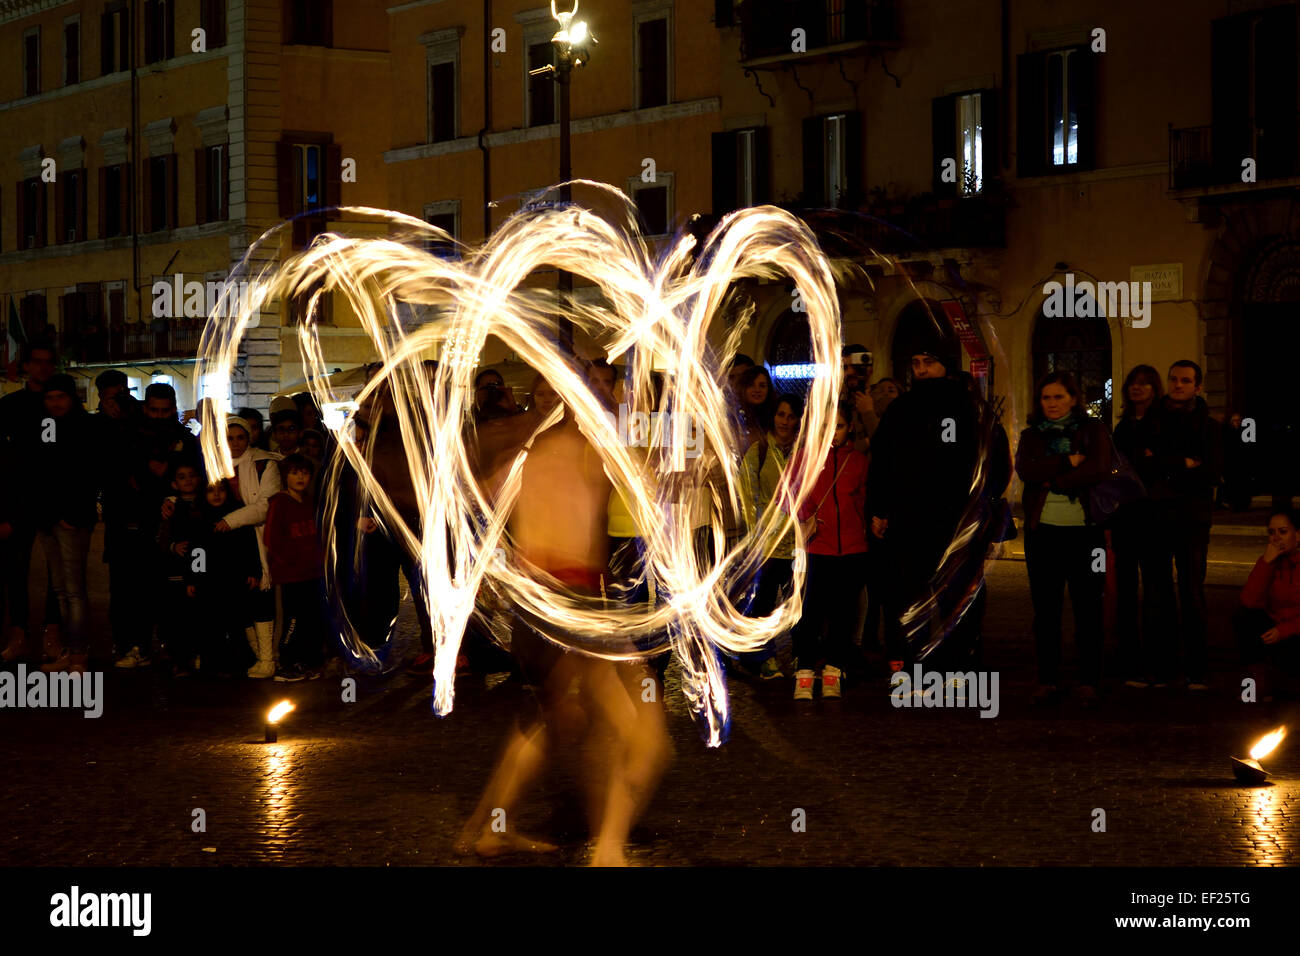 Fire street performer, Piazza Novano, Rome, Italie Banque D'Images